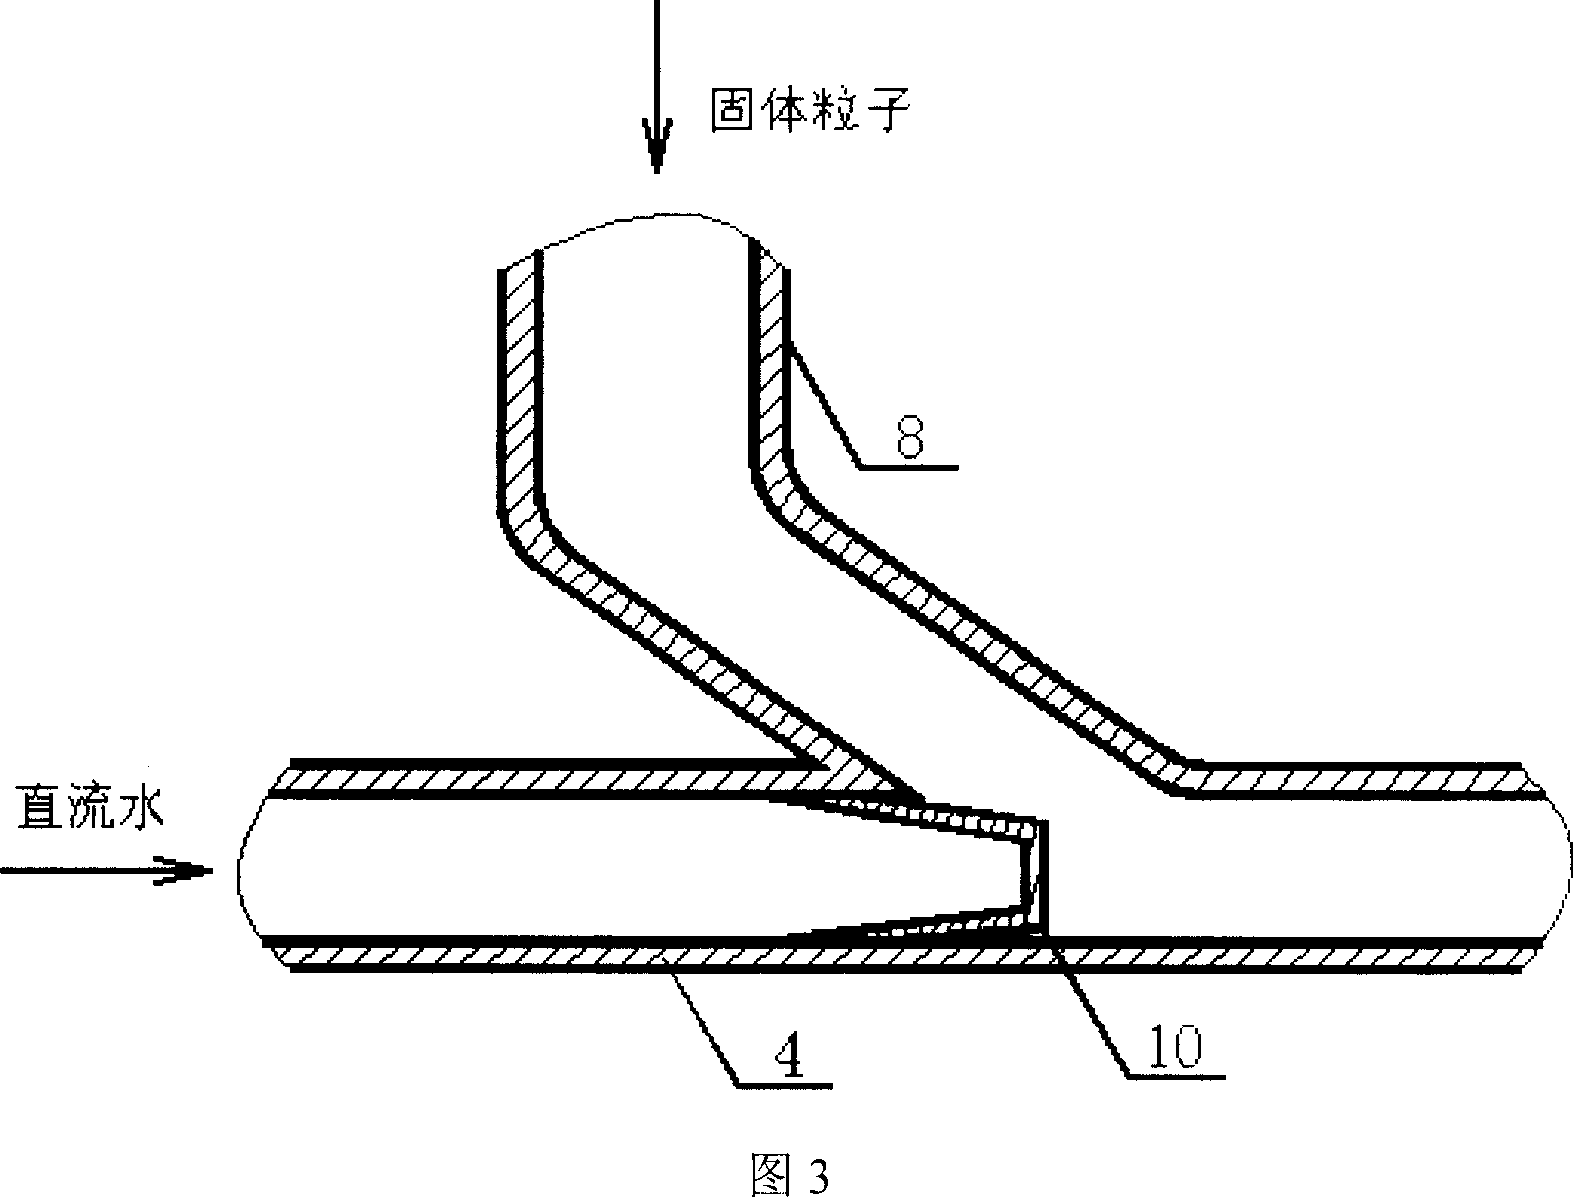 Solid-liquid separating method for fluidized bed heat exchanger